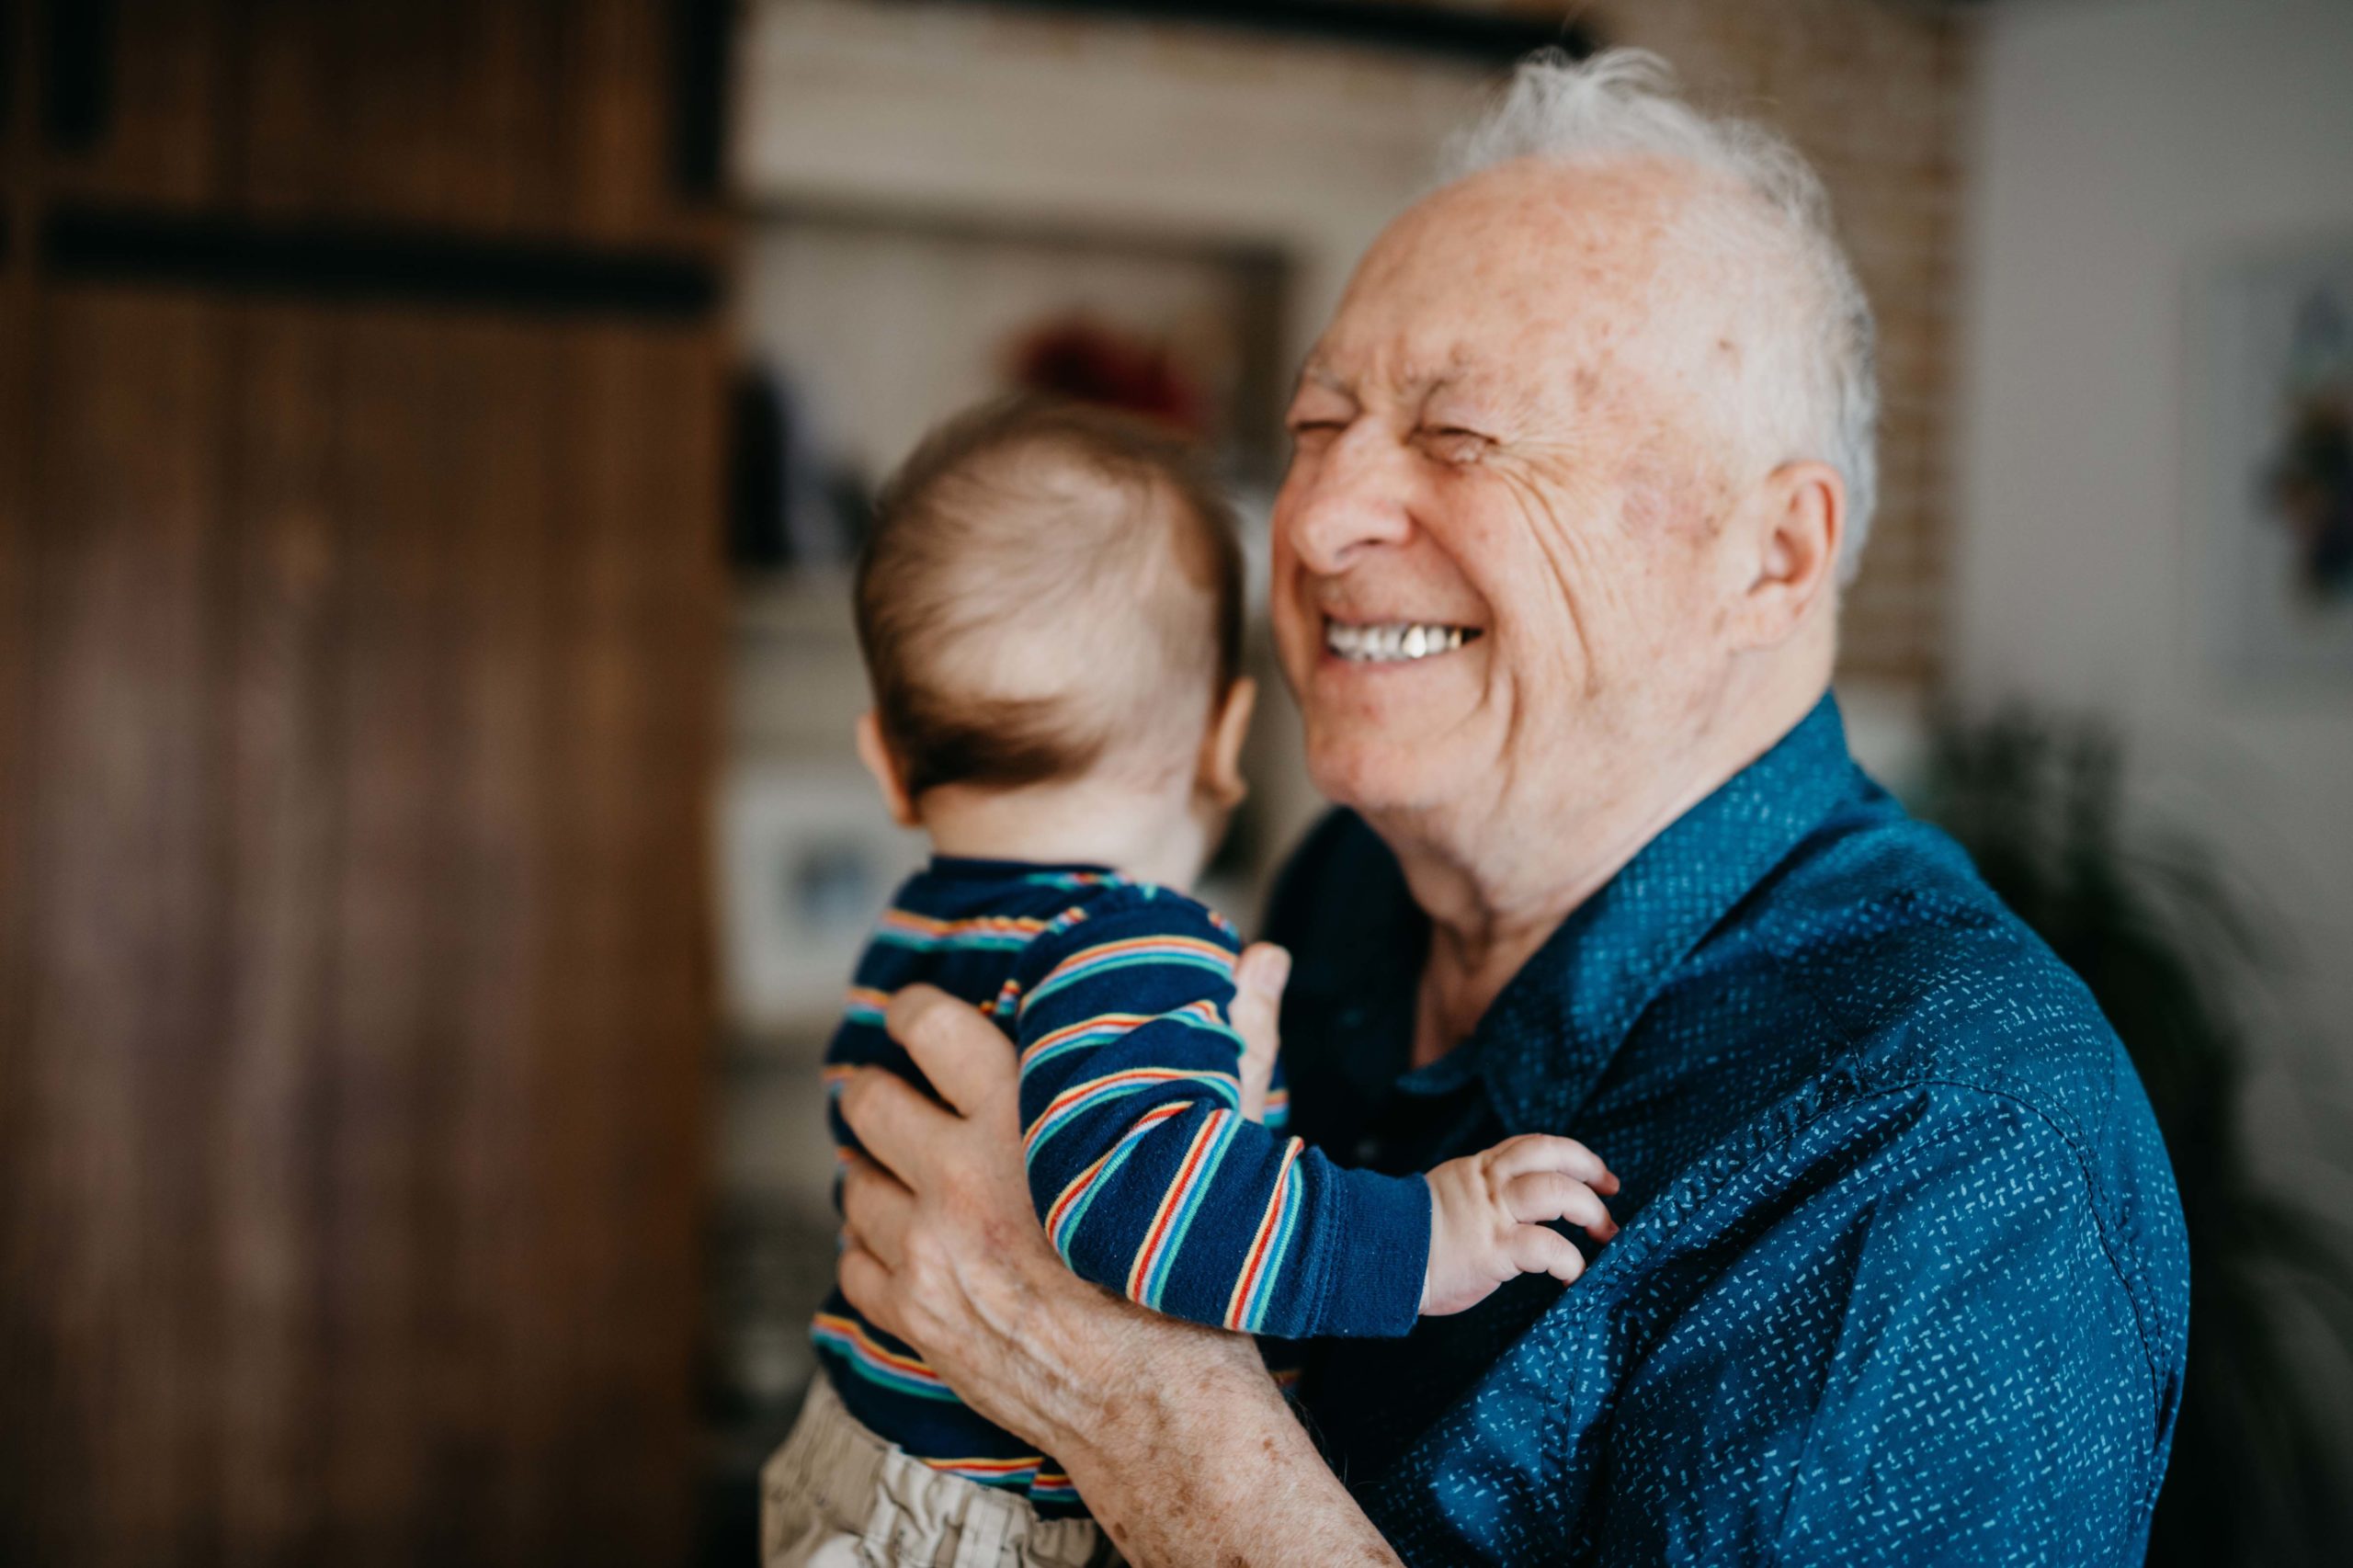 Great grandfather filled with joy embracing his great grandson